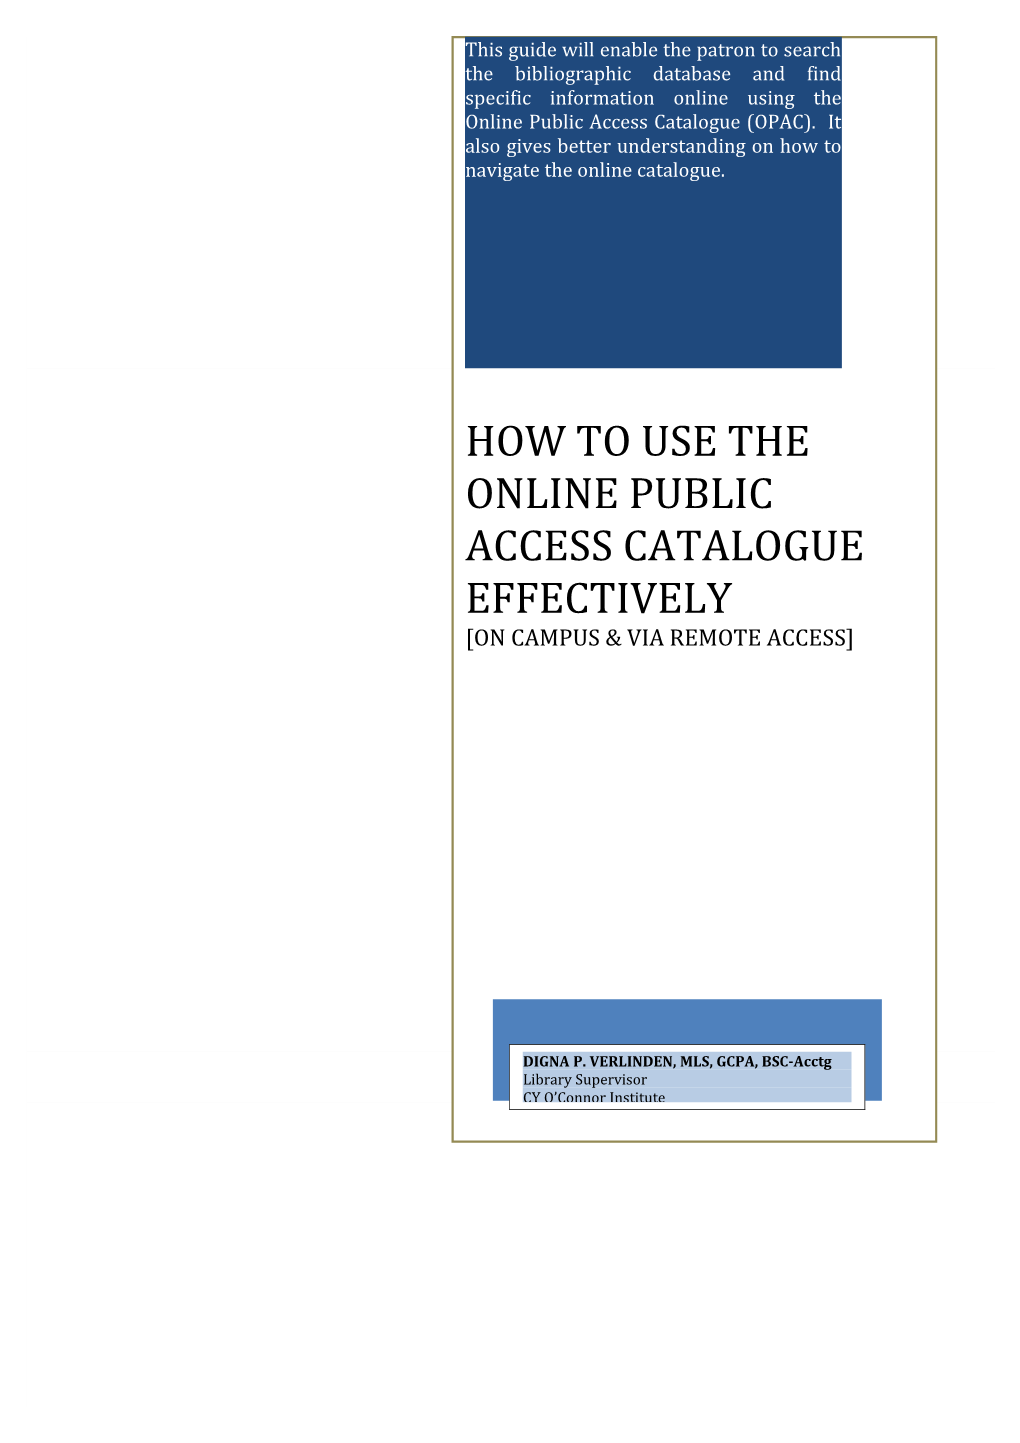 How to Use Effectively the Library Catalogue